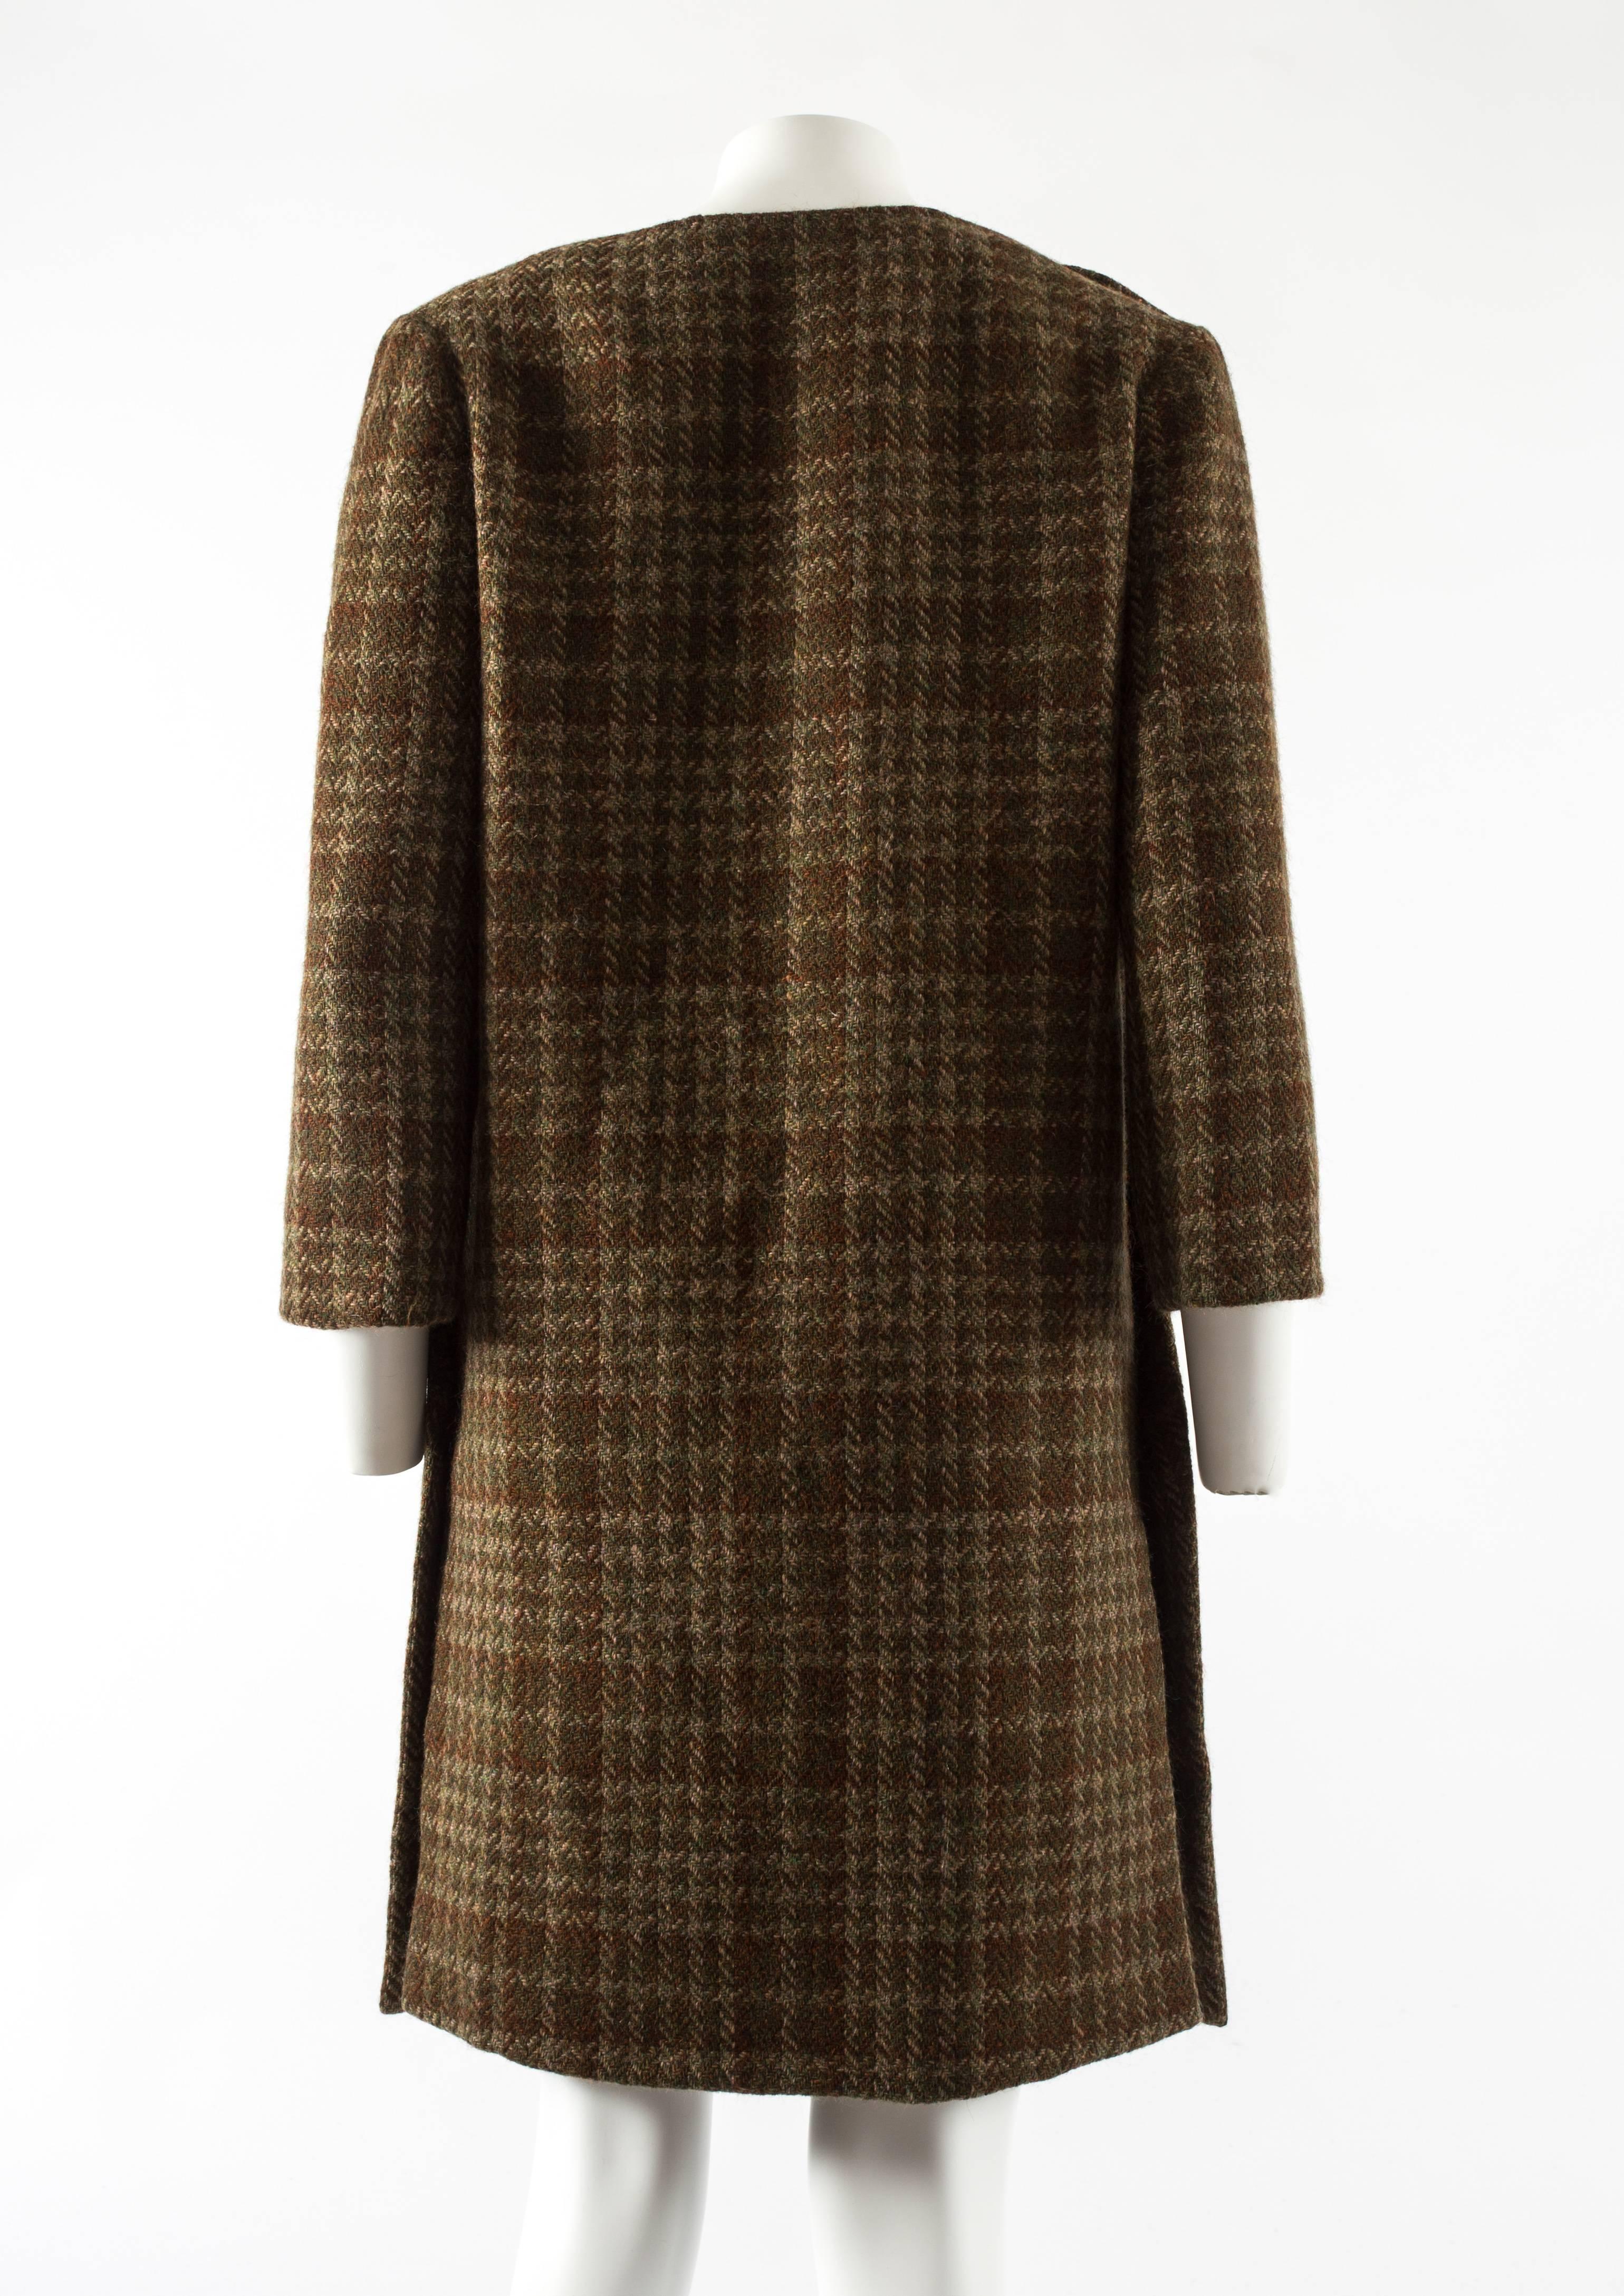 Black Jeanne Lanvin haute couture green tartan tweed coat and skirt set, c. 1940s For Sale